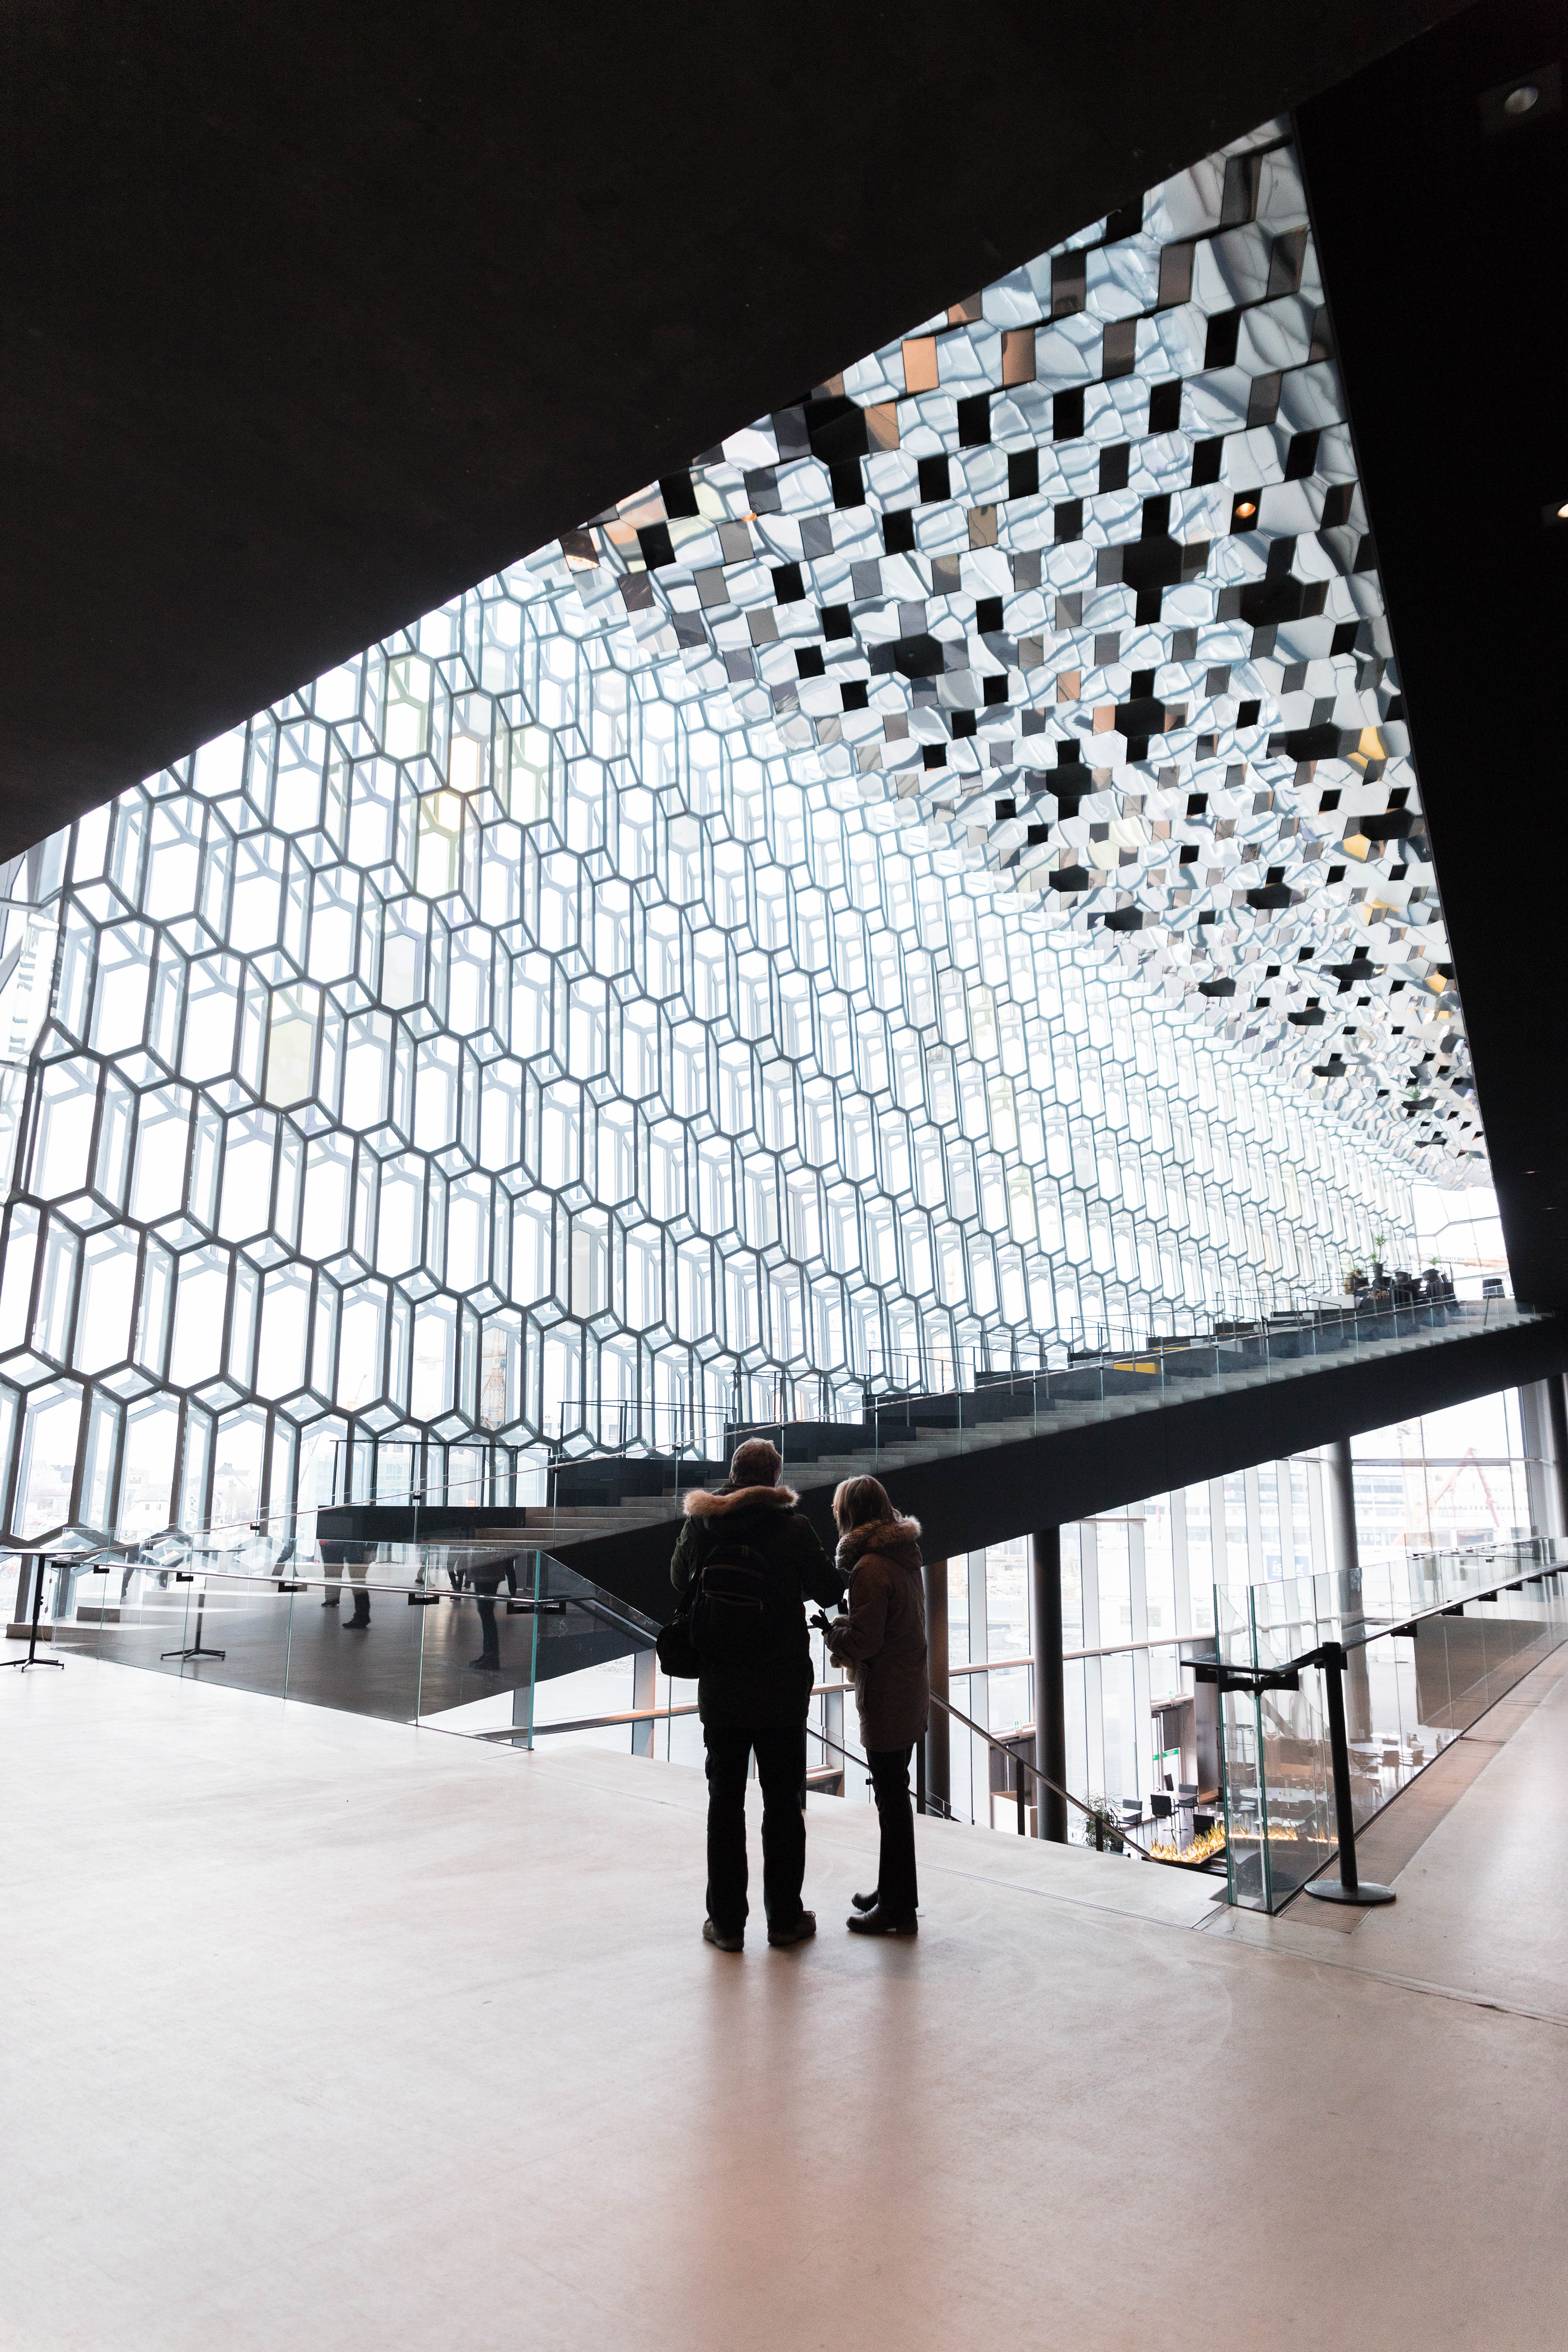 Architectural Photography: Harpa Concert Hall in Reykjavík, Iceland